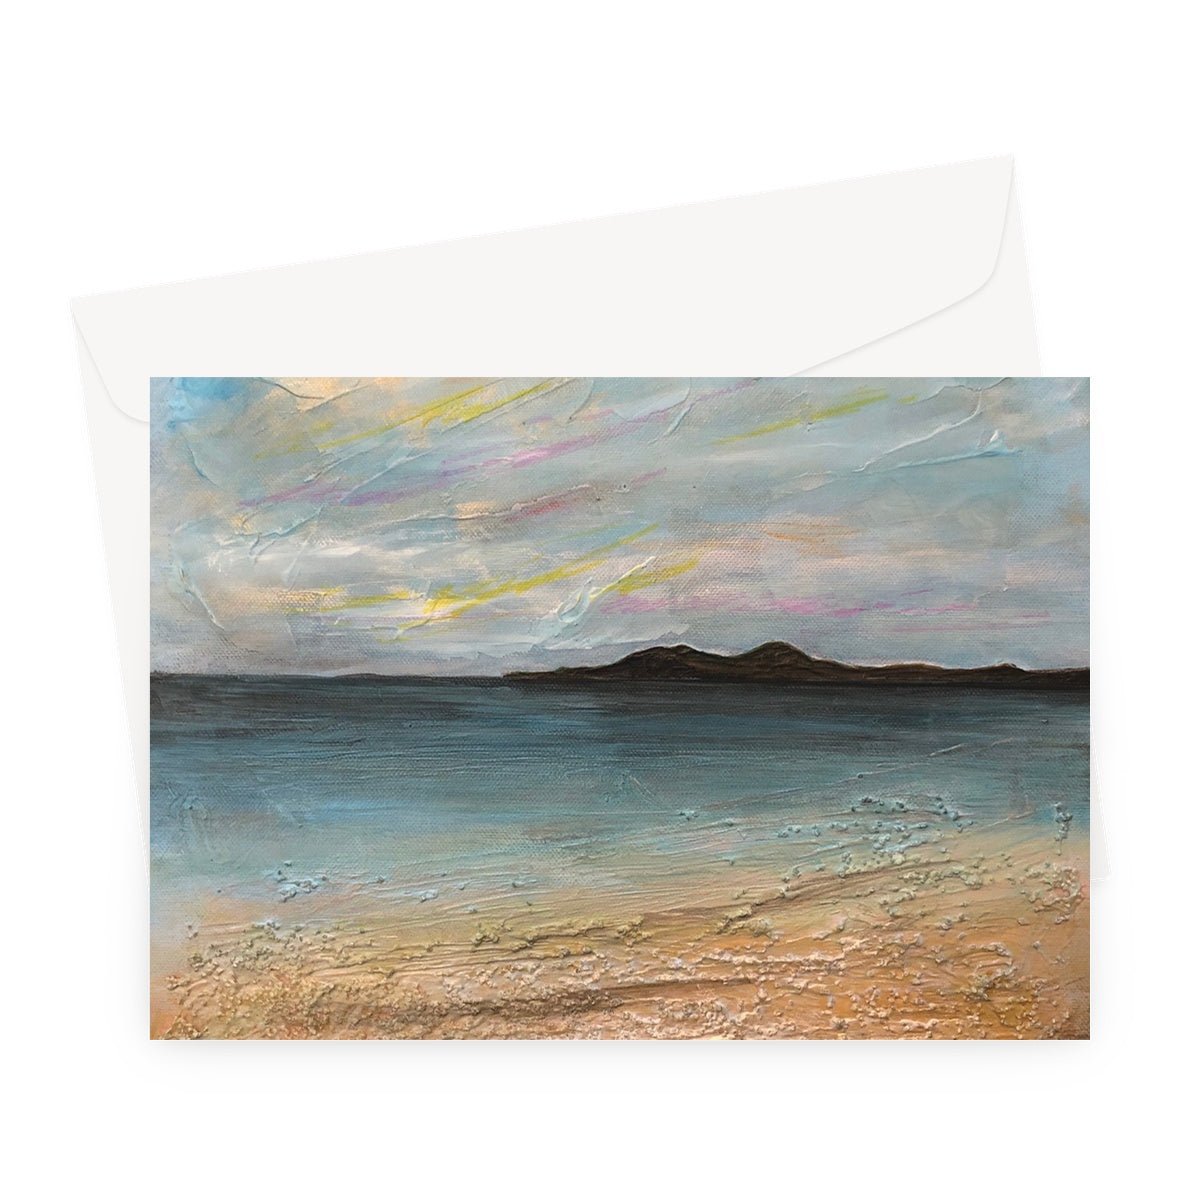 Garrynamonie Beach South Uist Art Gifts Greeting Card-Greetings Cards-Hebridean Islands Art Gallery-A5 Landscape-1 Card-Paintings, Prints, Homeware, Art Gifts From Scotland By Scottish Artist Kevin Hunter